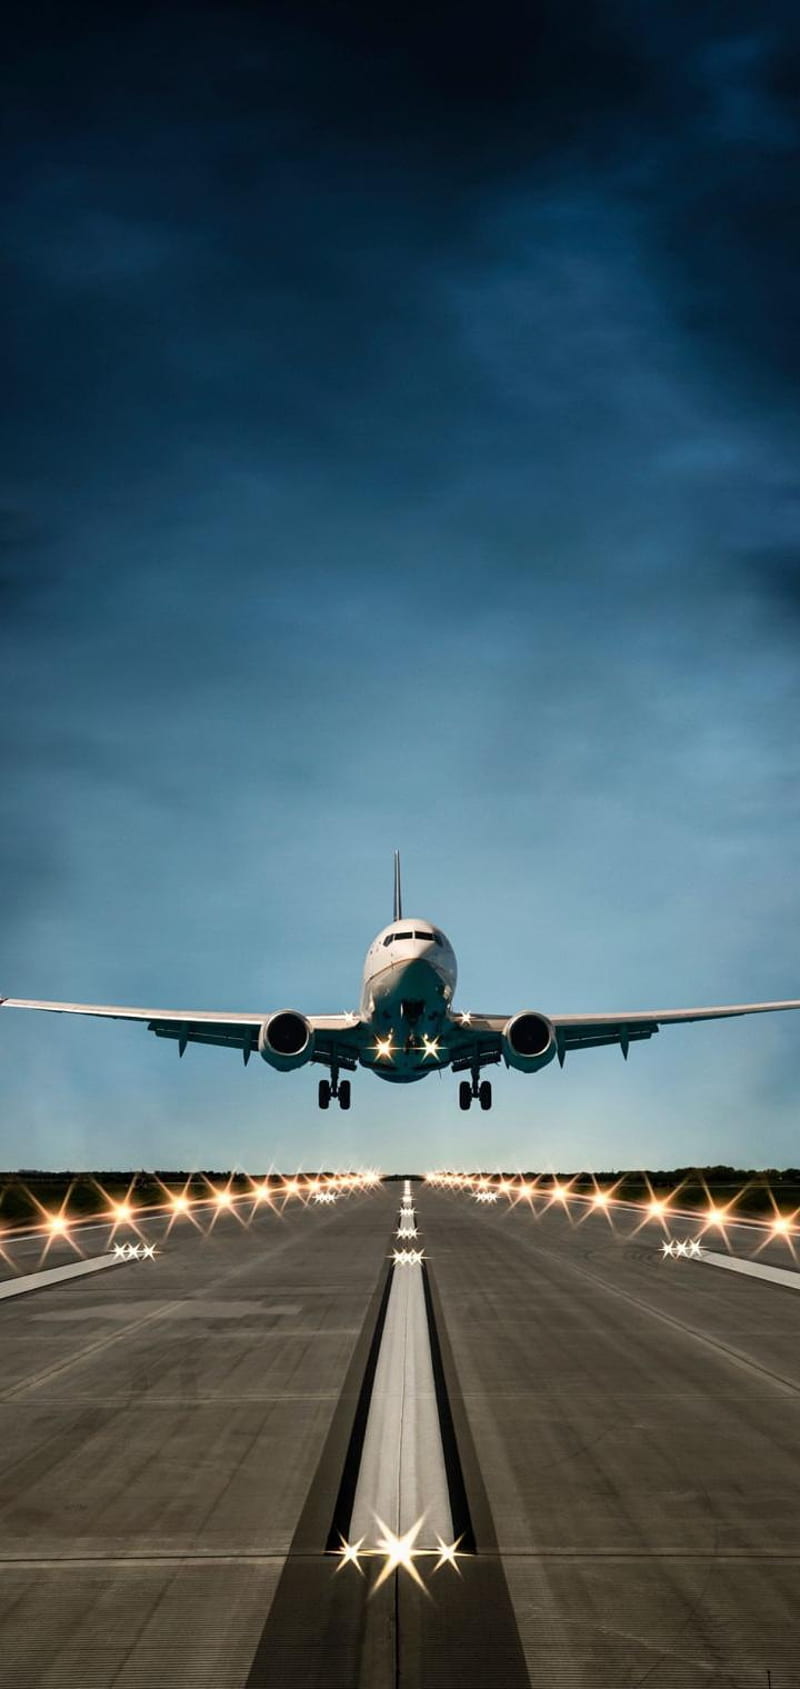 Airplane Passenger Airplanes Aviation Image Deskto... iPhone Wallpapers  Free Download